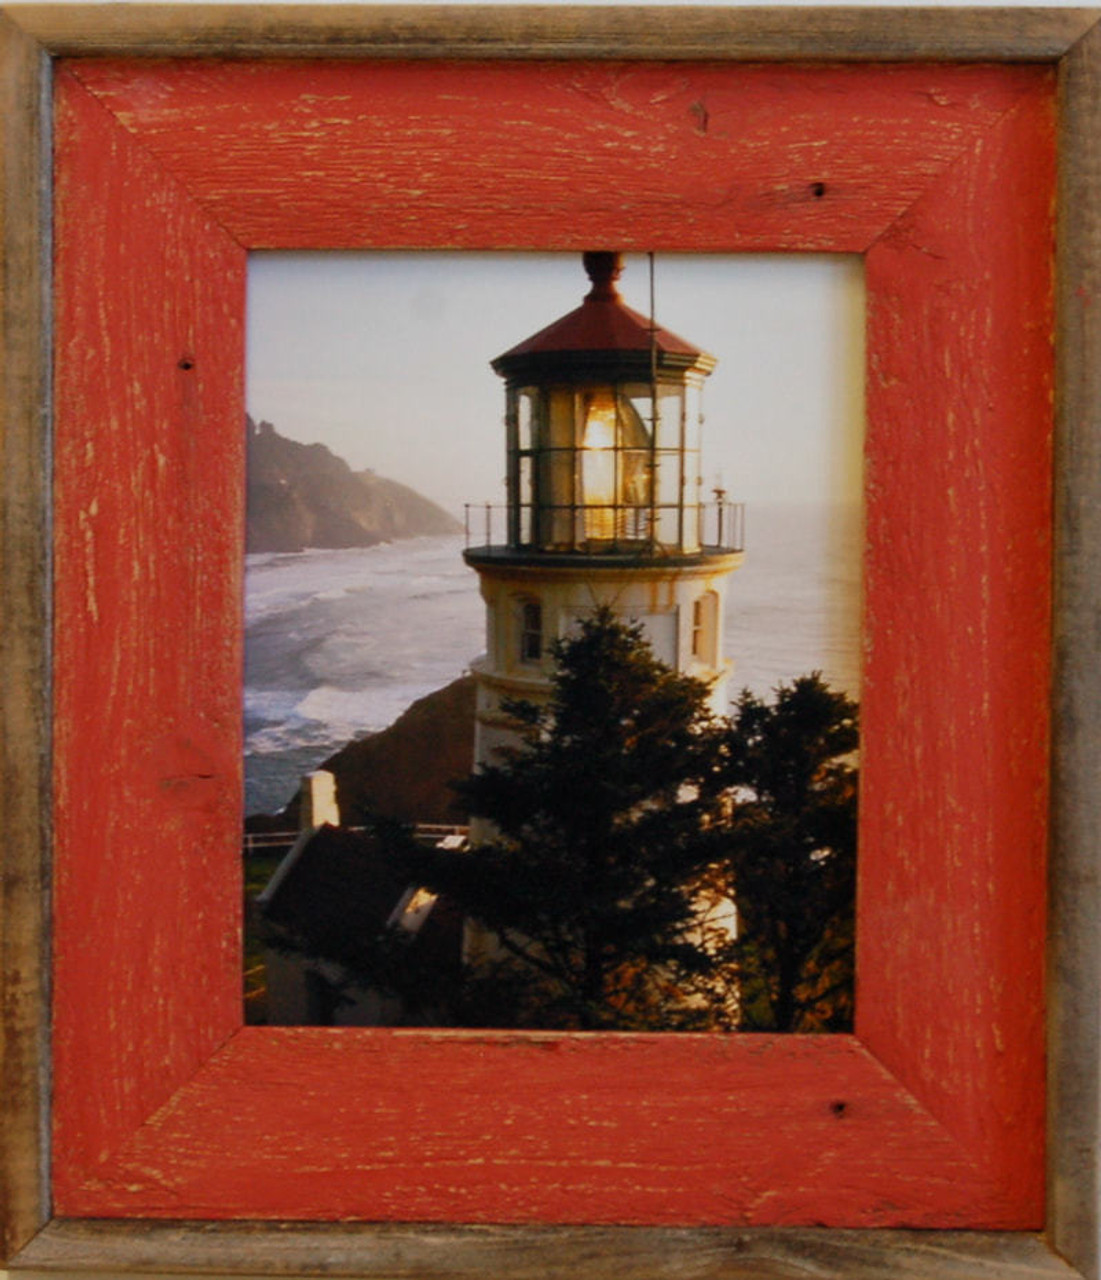 11x14 Rustic Frames, Narrow Width 2 inch Lighthouse Series